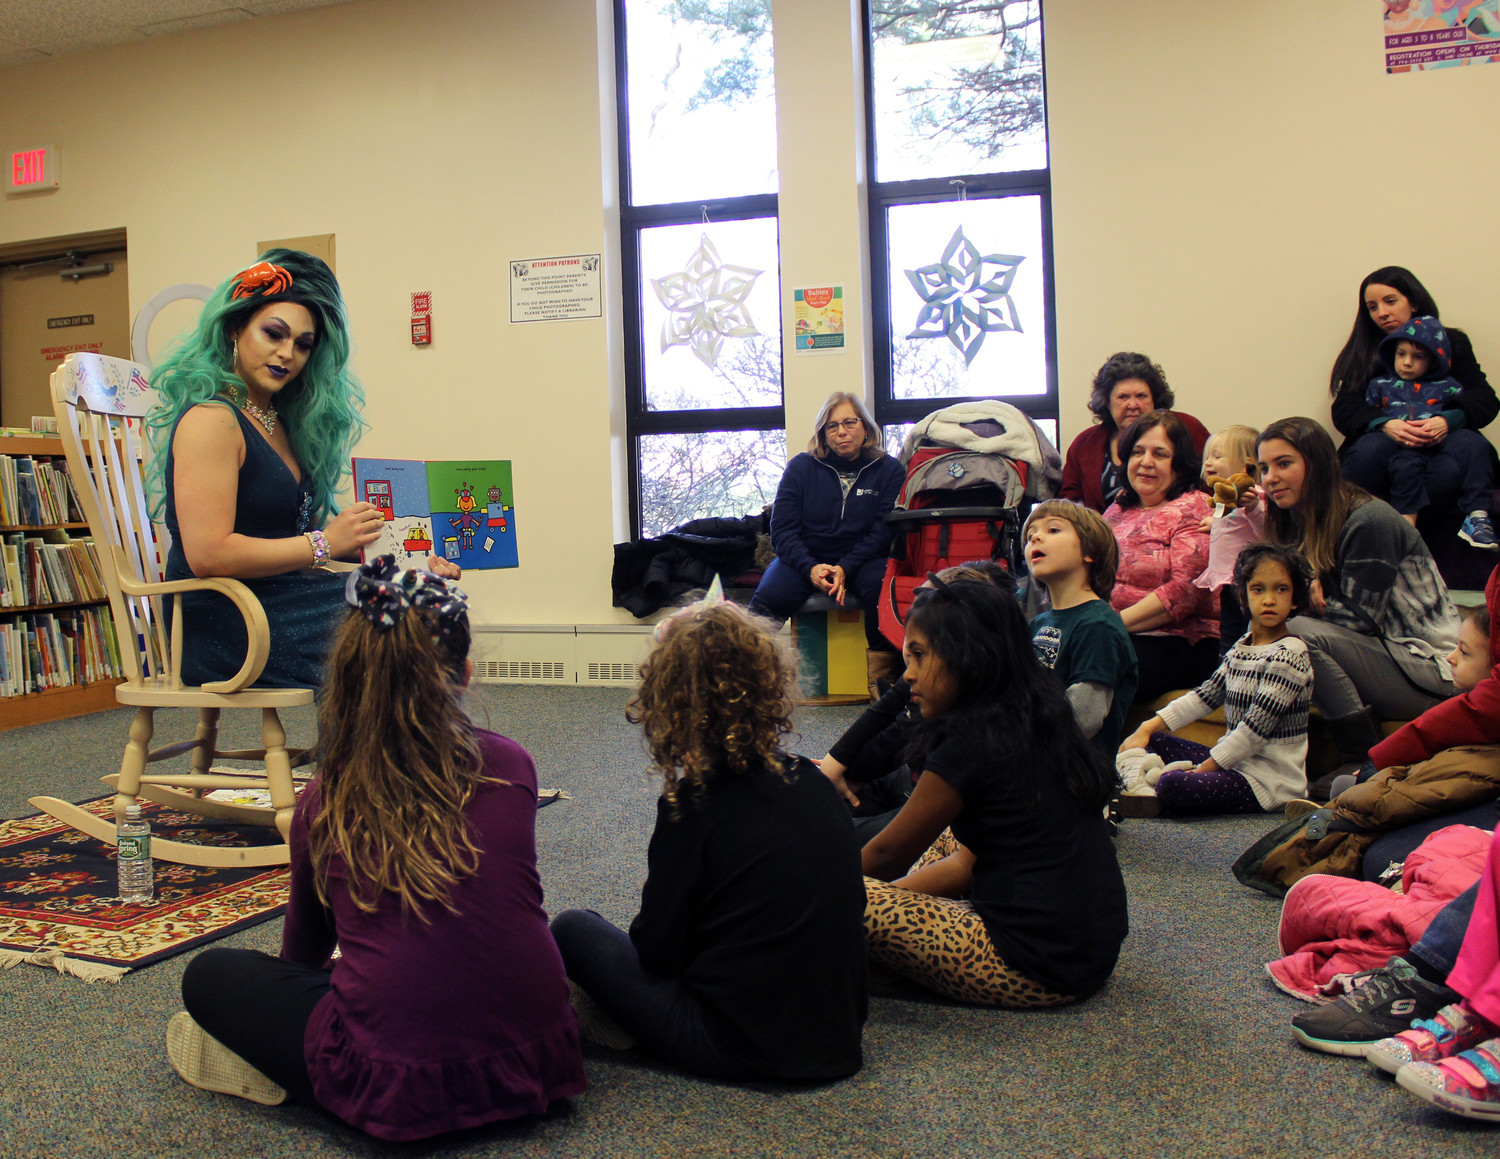 Bella Noche read several books at Drag Queen Story Hour at the East Meadow Public Library on Jan. 12, including “Love the World,” about loving the environment, others and oneself. “Does everyone here love themselves?” she asked before starting the book. “It’s important to love yourself.”